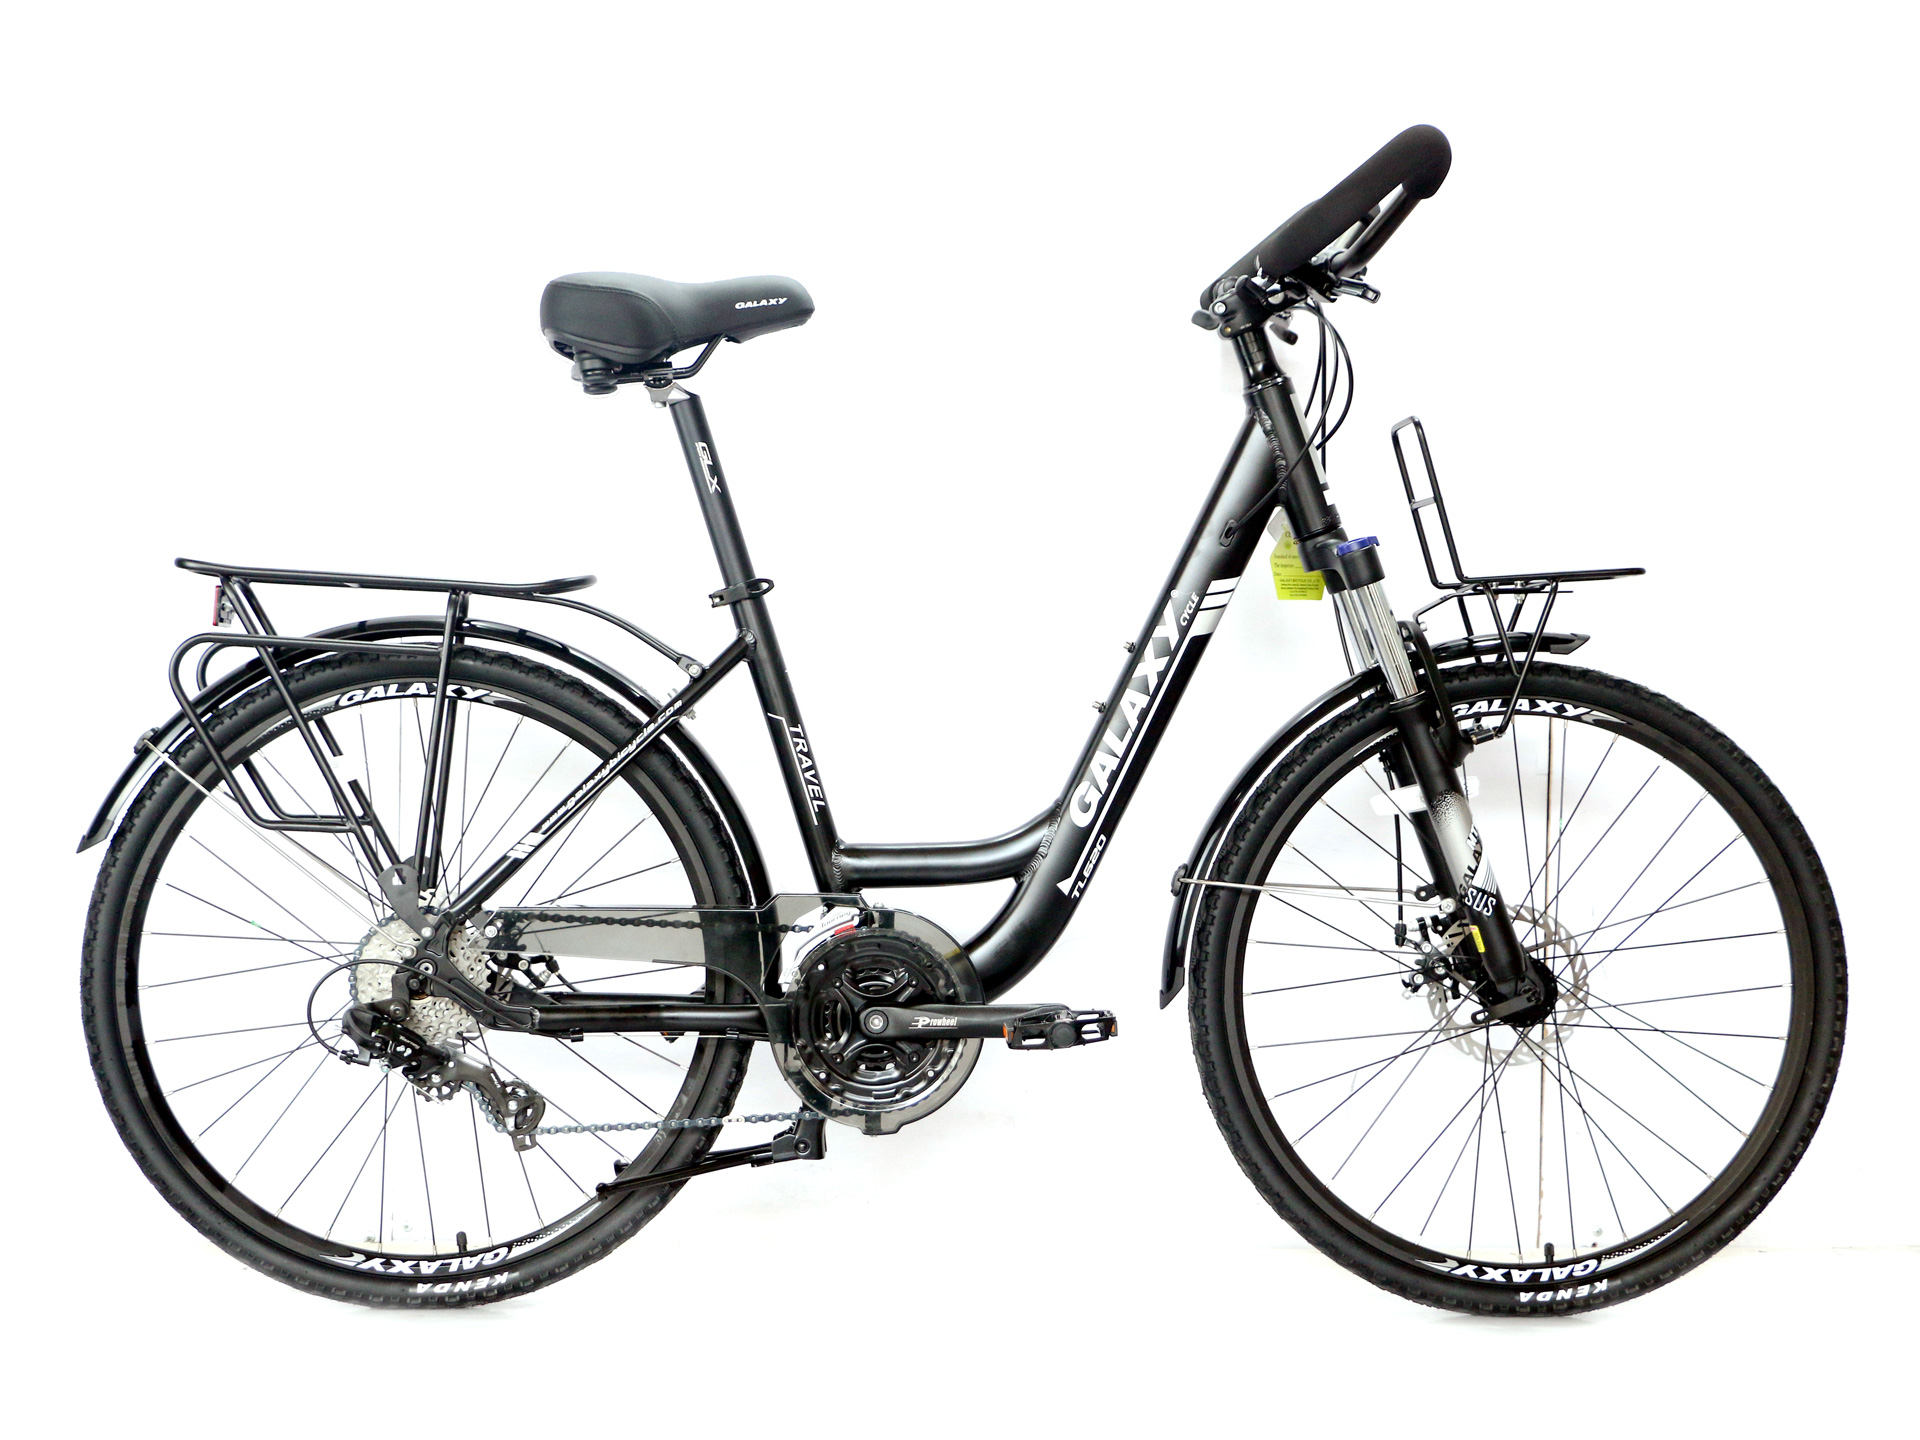 Galaxy TL620 26" Alloy Bike for Delivery